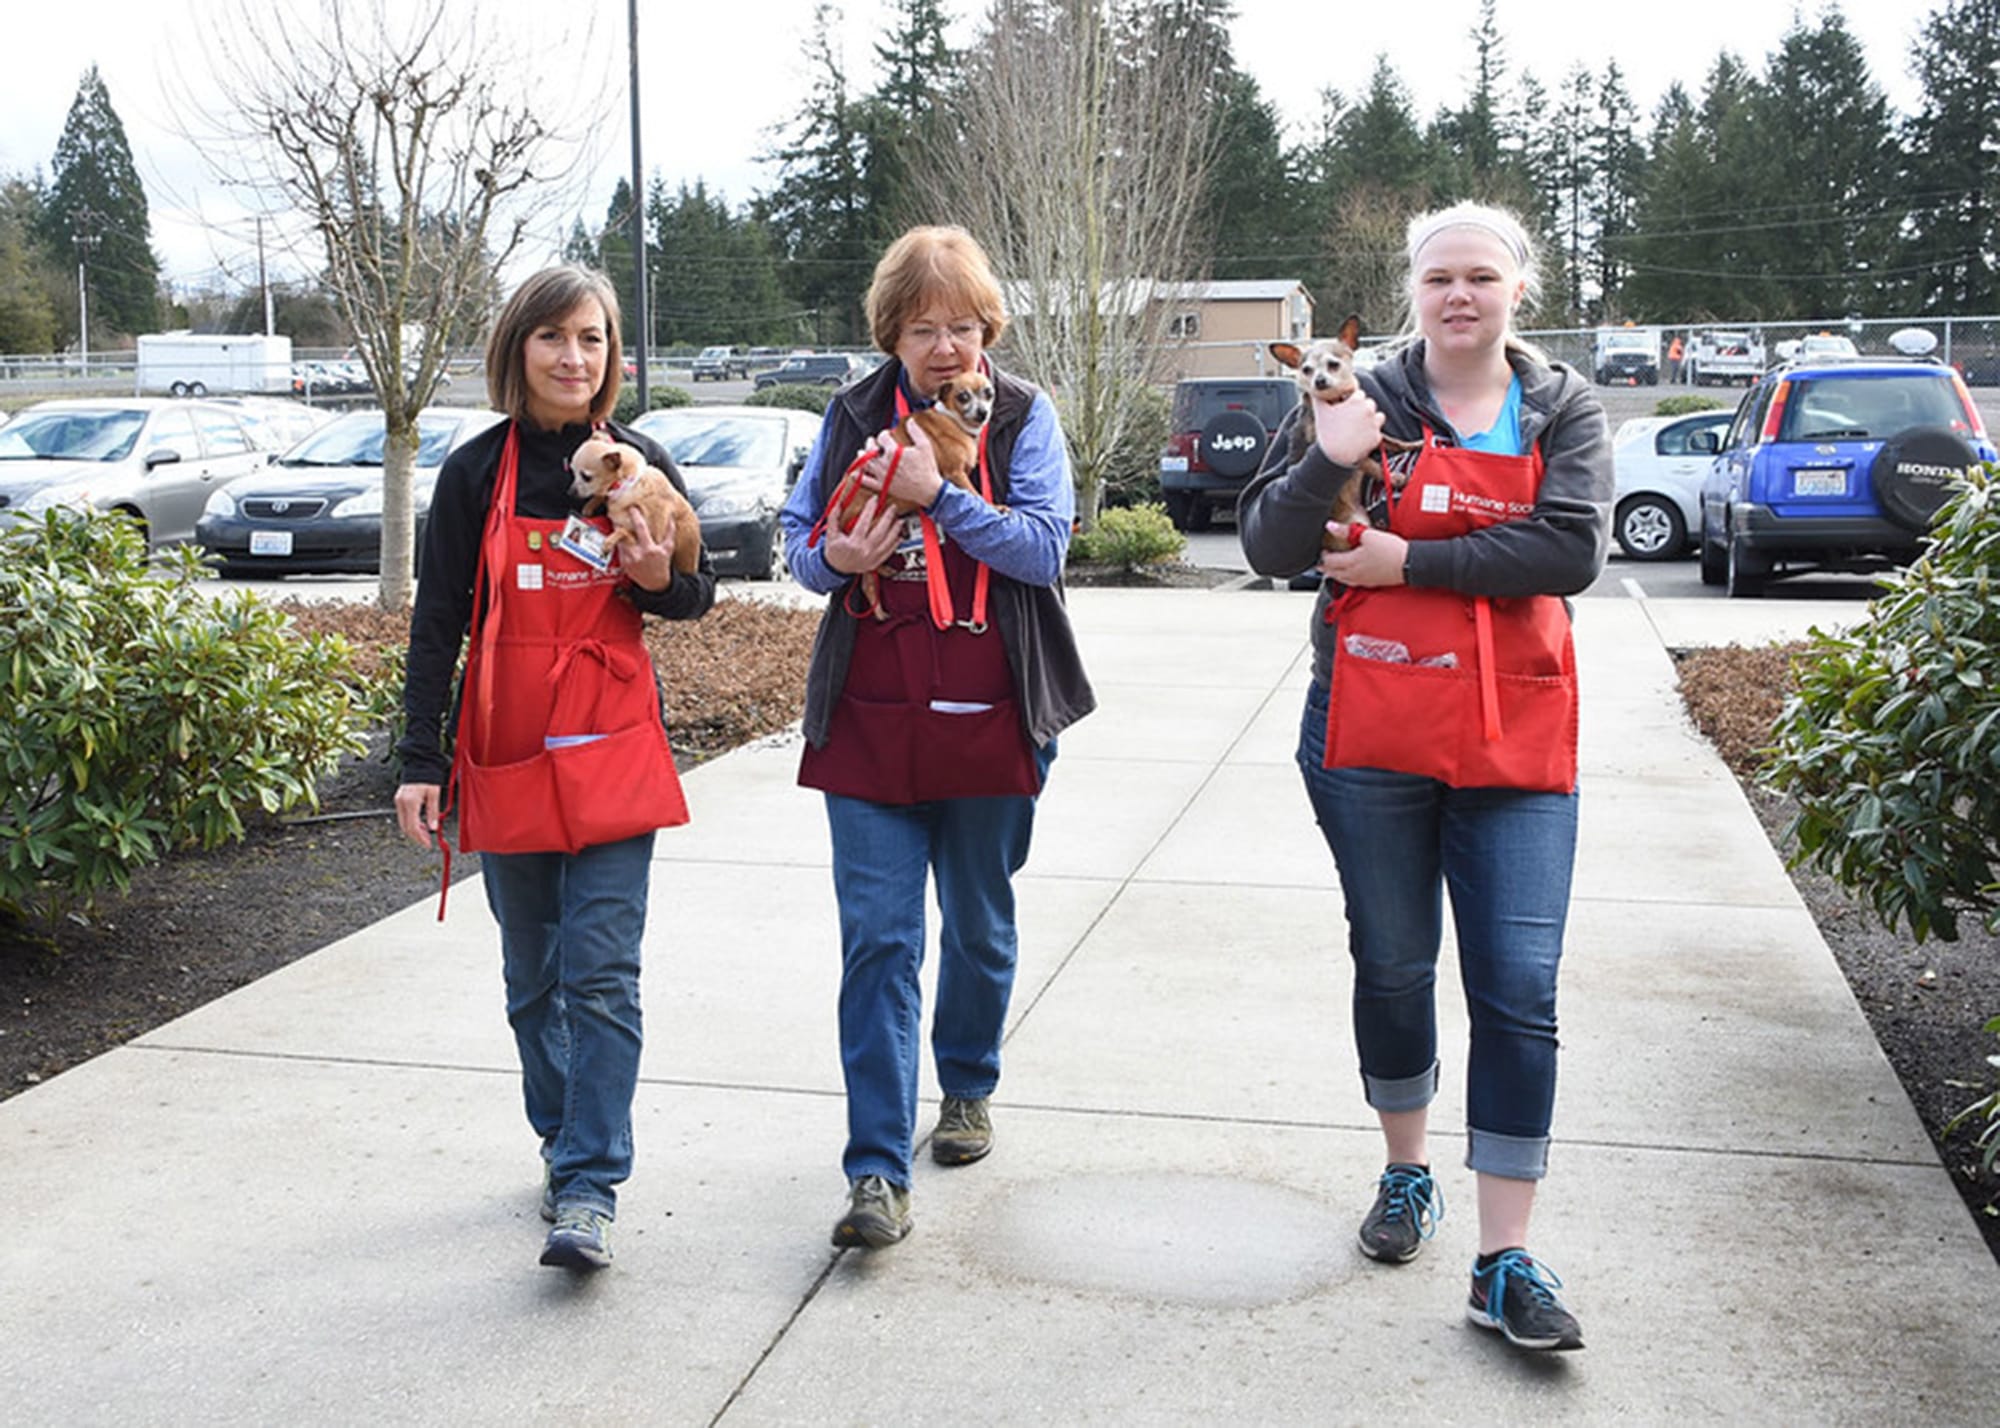 East Vancouver: The Golden Girls, from left, Penny Ruthruff, Kathie Malone and Amanda Sobotta, are three volunteers at the Humane Society of Southwest Washington. The society honored its volunteers at an event in February.